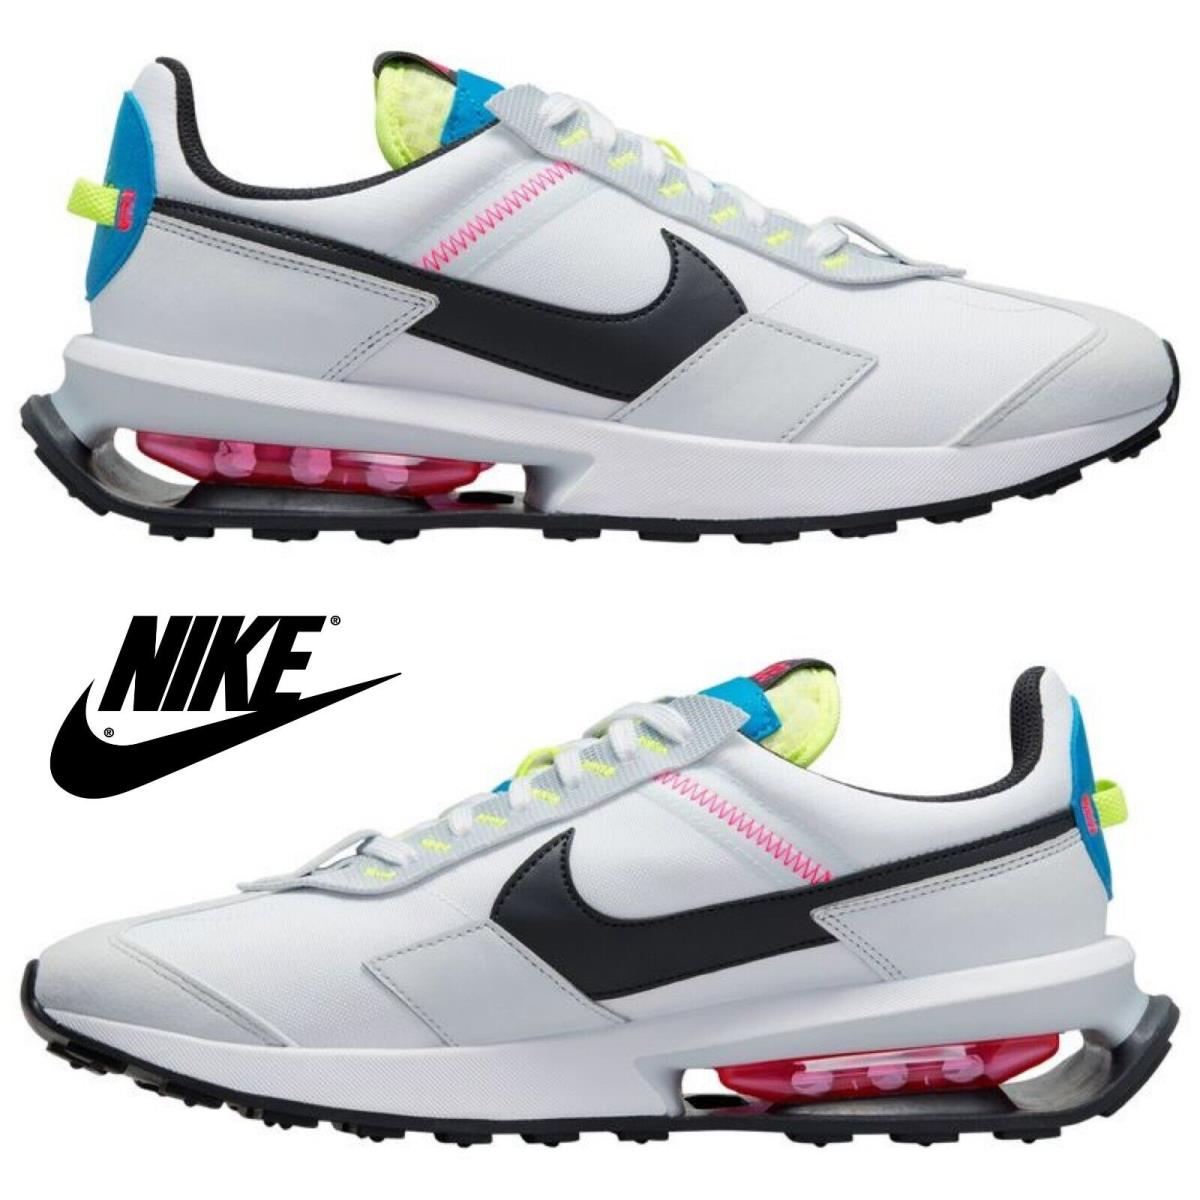 Nike Air Max Pre-day Men`s Sneakers Comfort Casual Sport Shoes White Multi